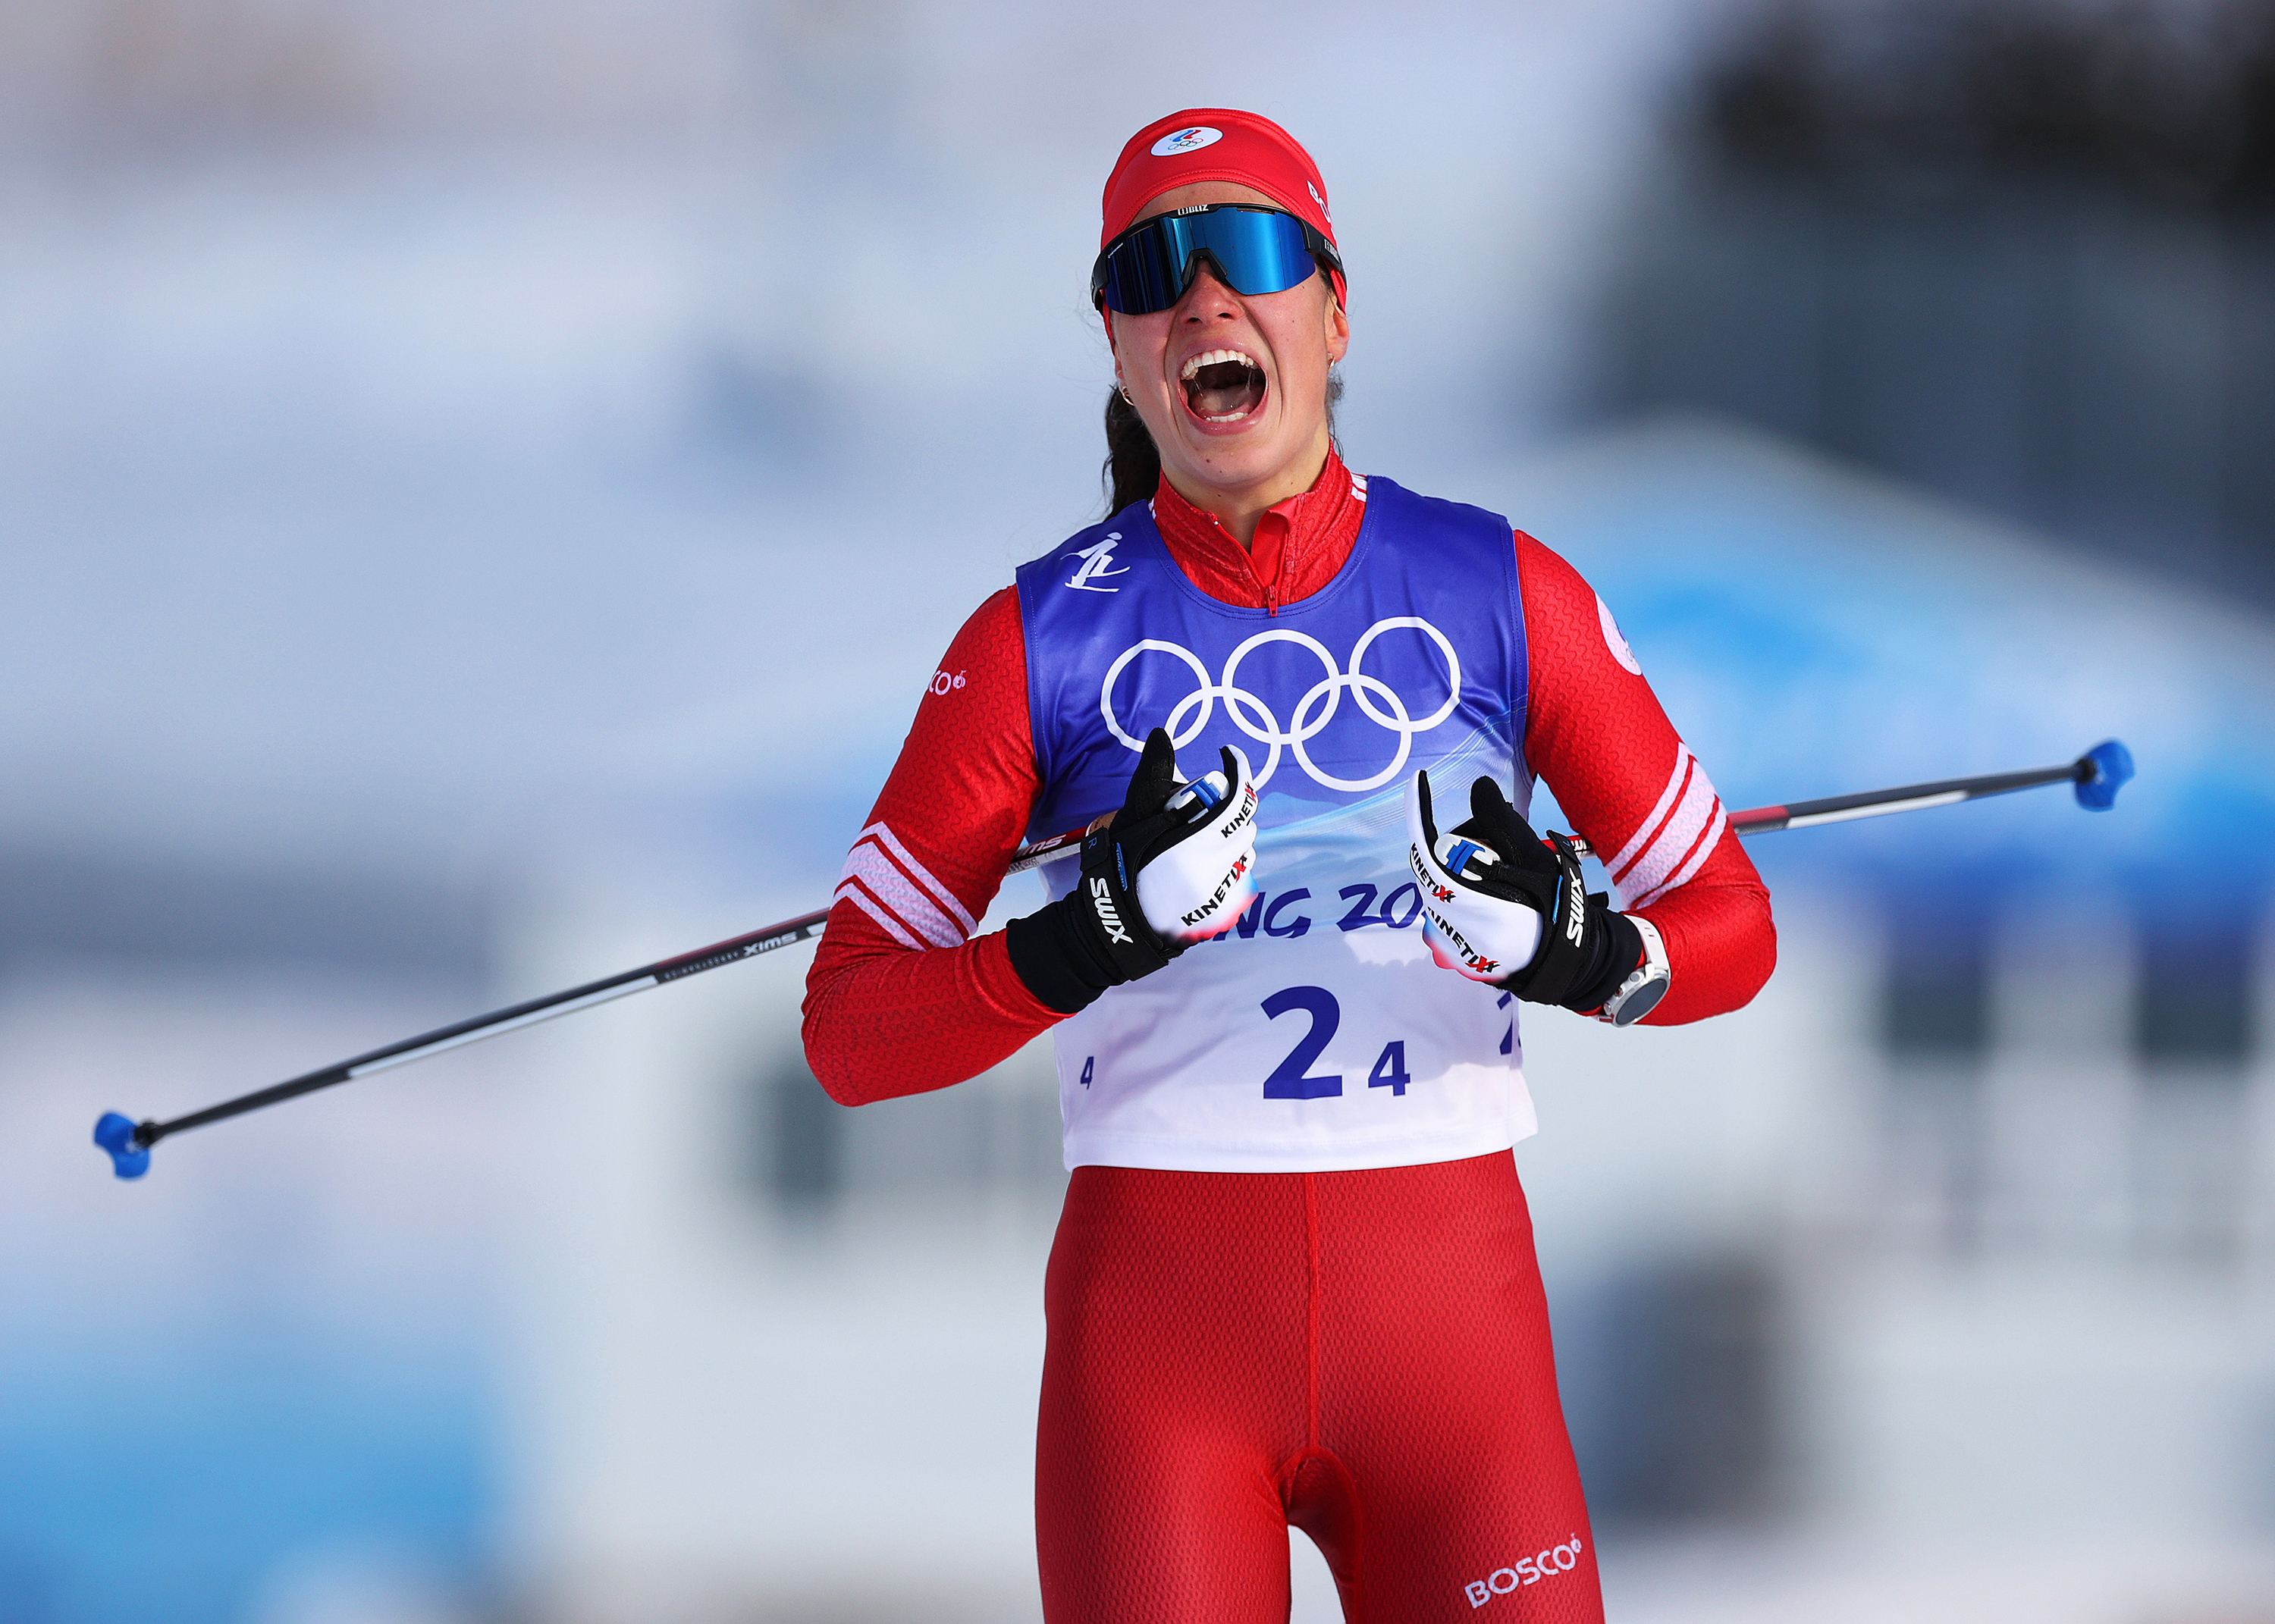 Olympic skier called a hero or traitor depending on social media